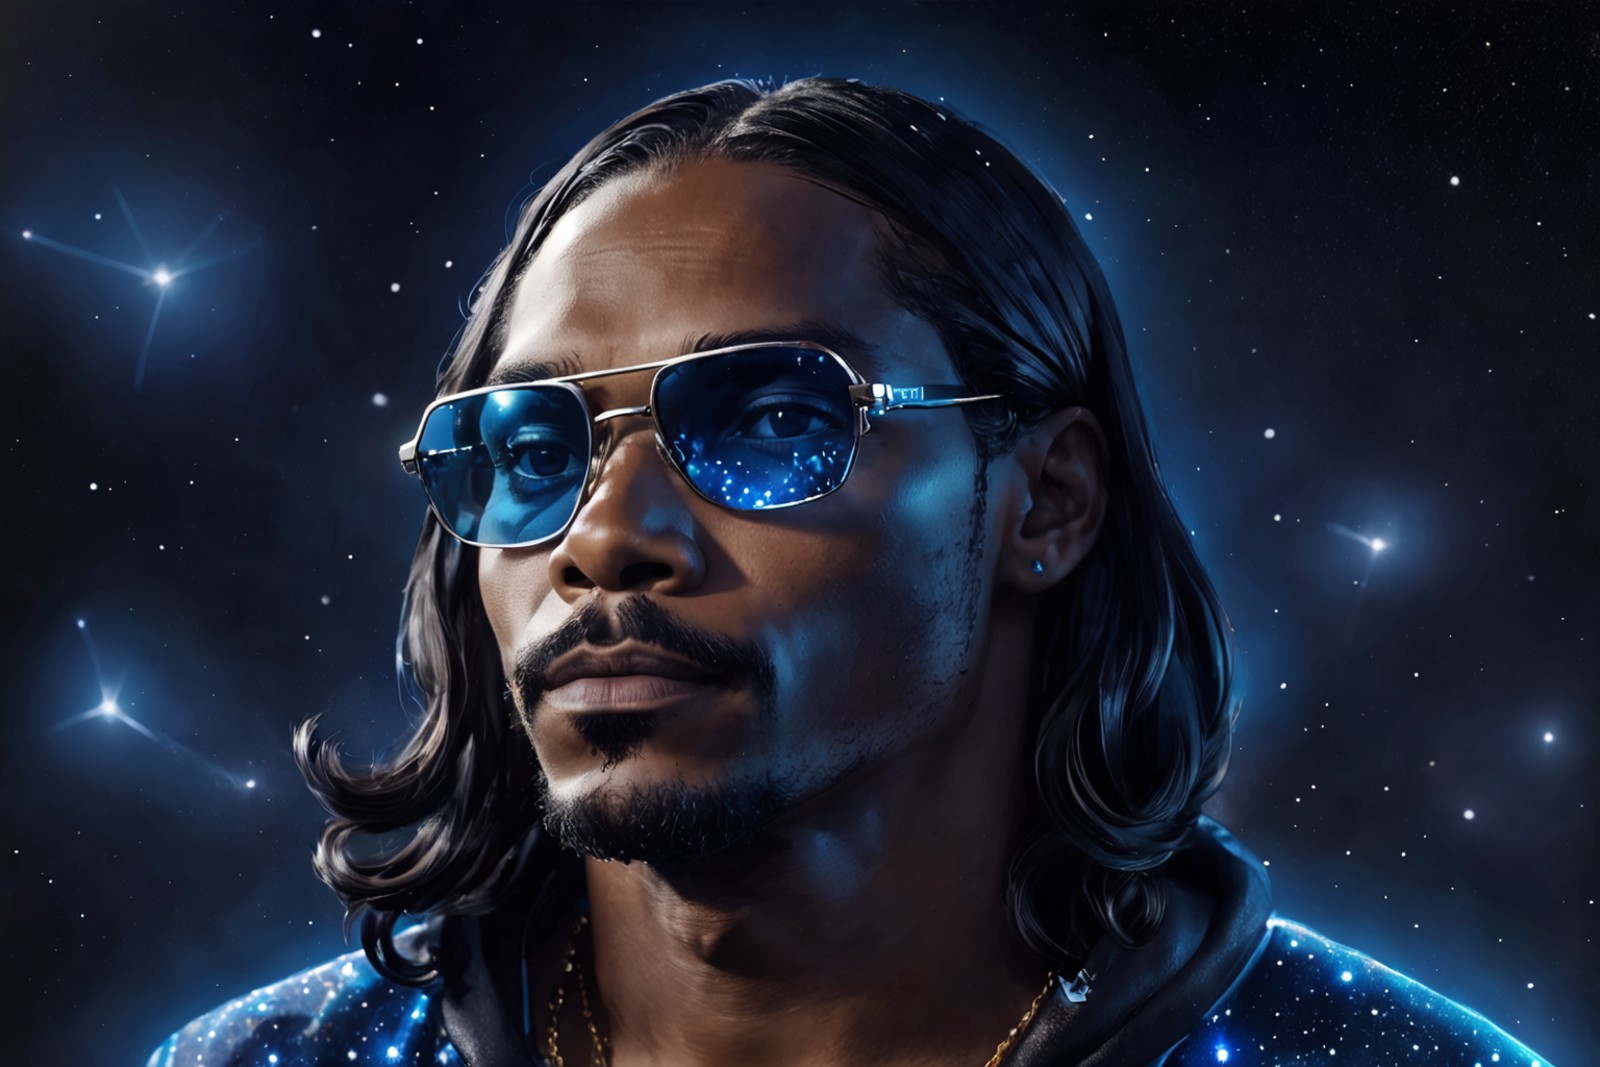 c0nst3llation, ((a fully transparent neon blue Snoop Dogg, made out of constellation style and signs with stars)), wearing...